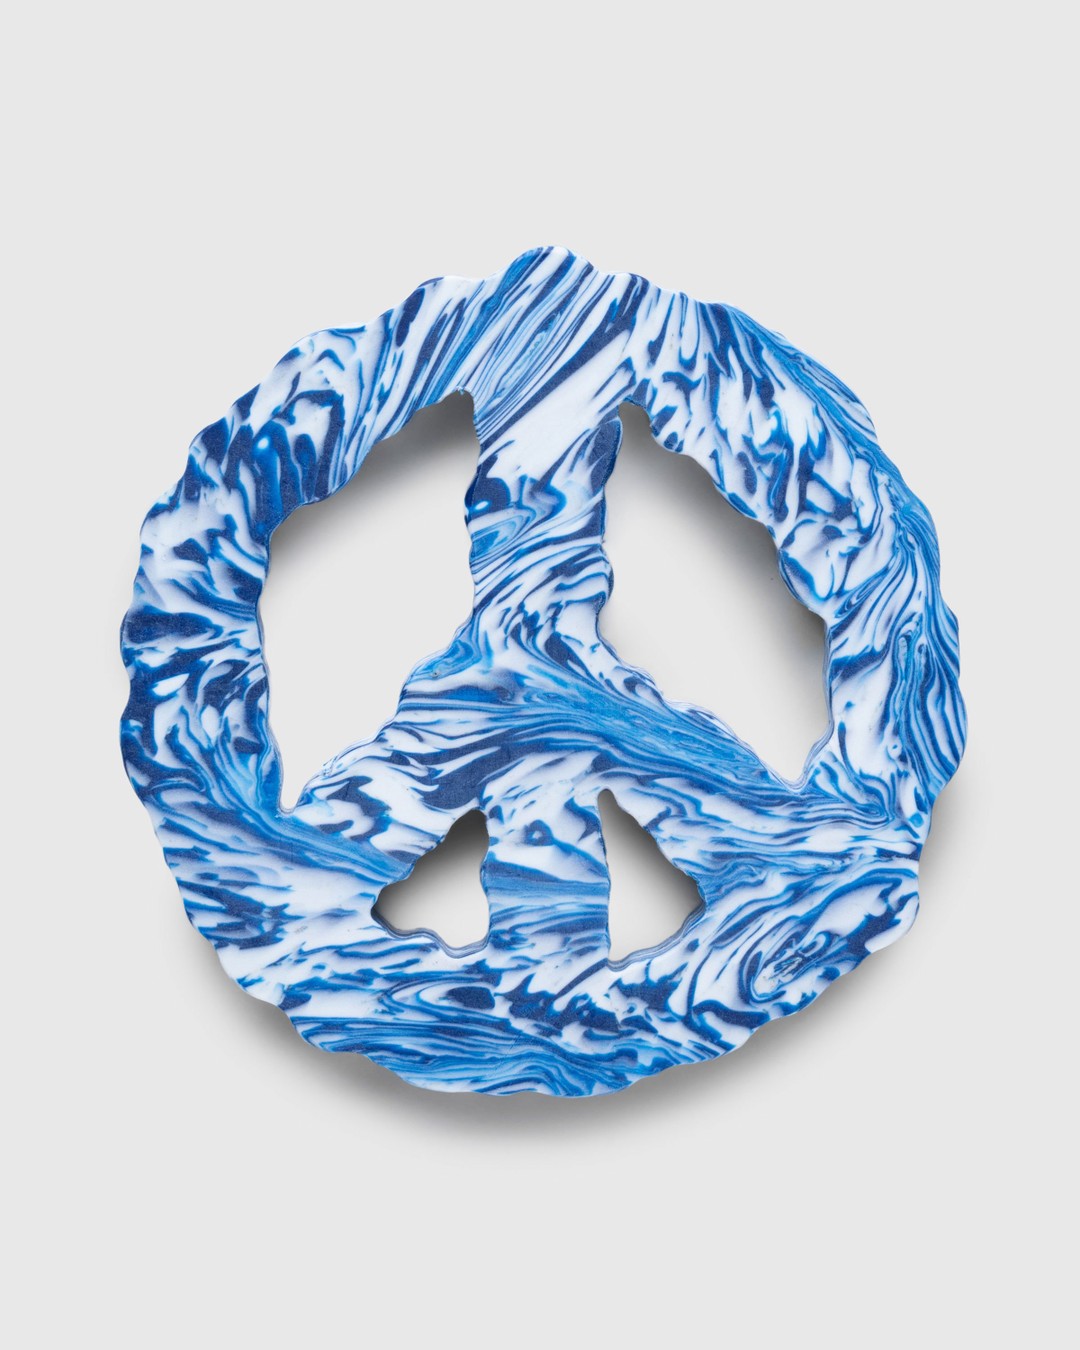 Space Available Studio – Clouded Peace Coaster Set of 4 Blue - Deco - Blue - Image 1